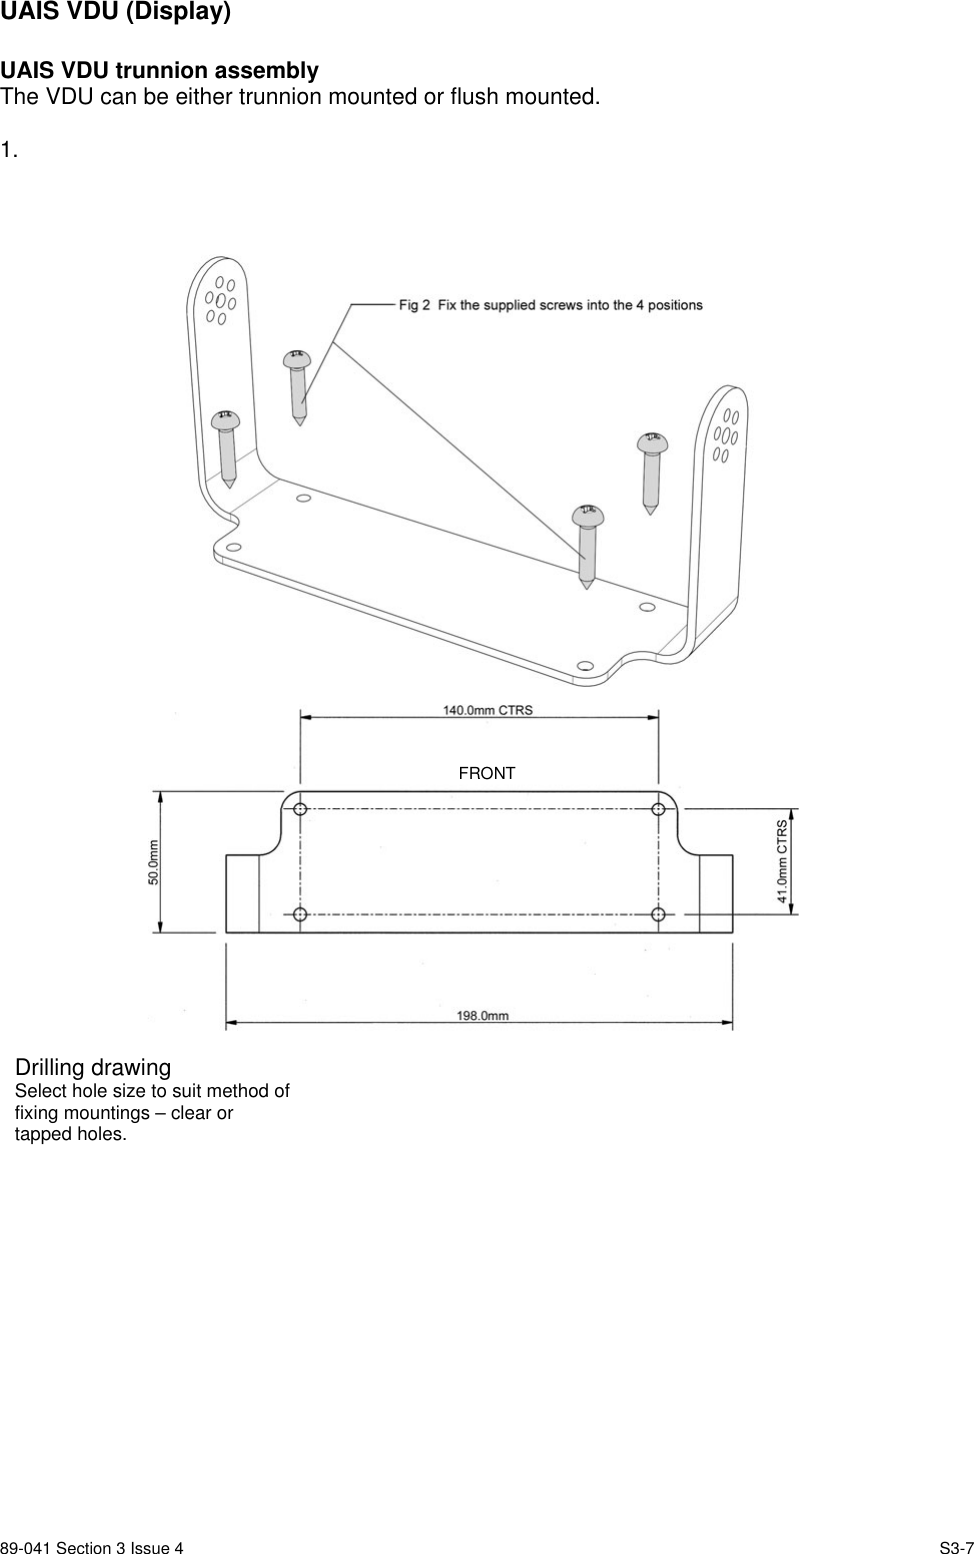 89-041 Section 3 Issue 4 S3-7UAIS VDU (Display)UAIS VDU trunnion assemblyThe VDU can be either trunnion mounted or flush mounted.1. FRONTDrilling drawingSelect hole size to suit method offixing mountings – clear ortapped holes.